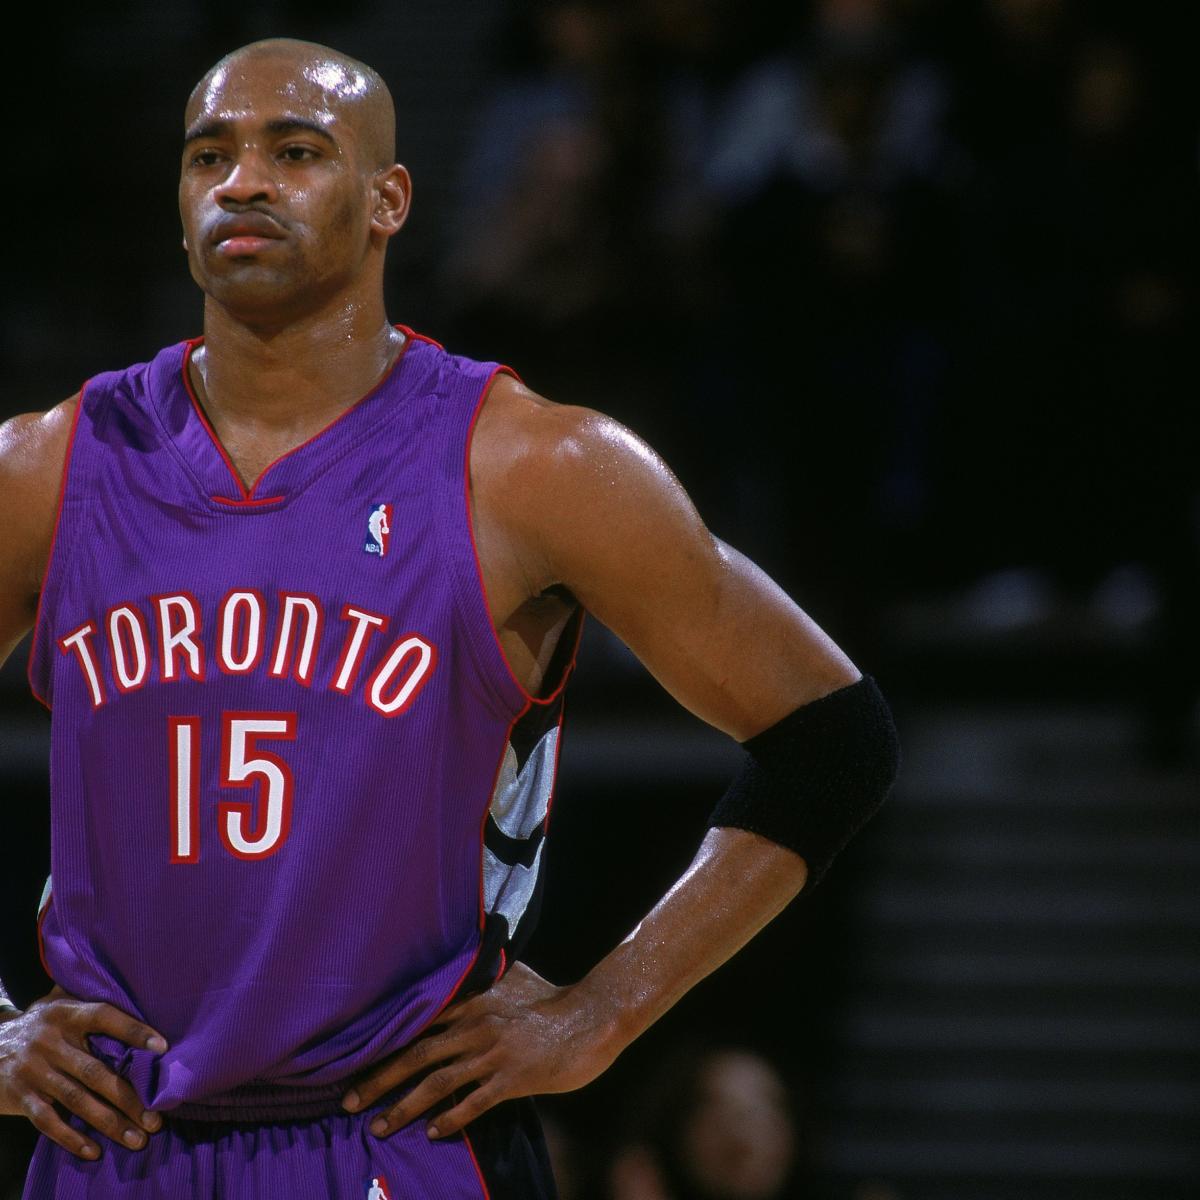 NBA at 75: Vince Carter single-handedly revives the slam-dunk contest